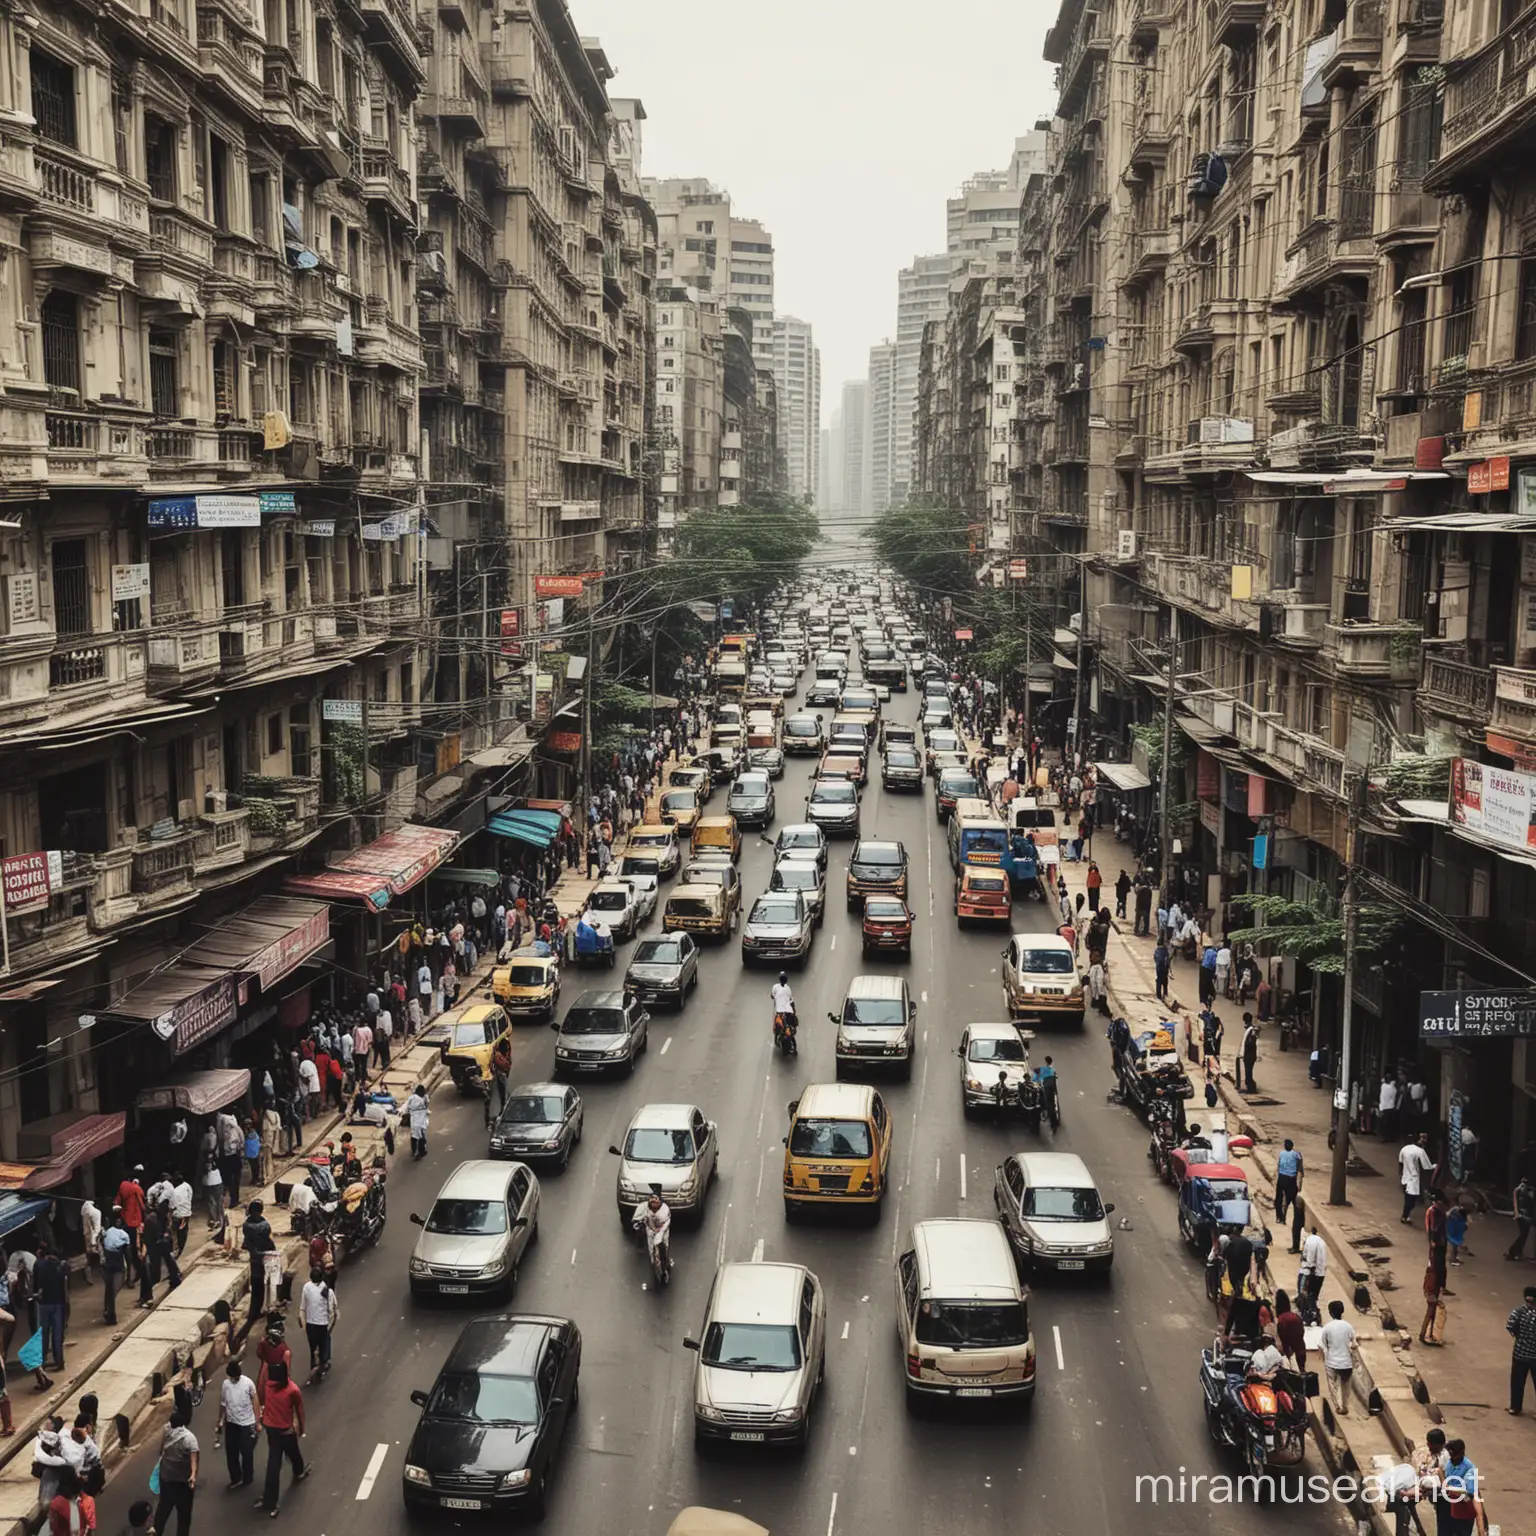 Vibrant Mumbai Street Life Culture and Commerce Intertwined